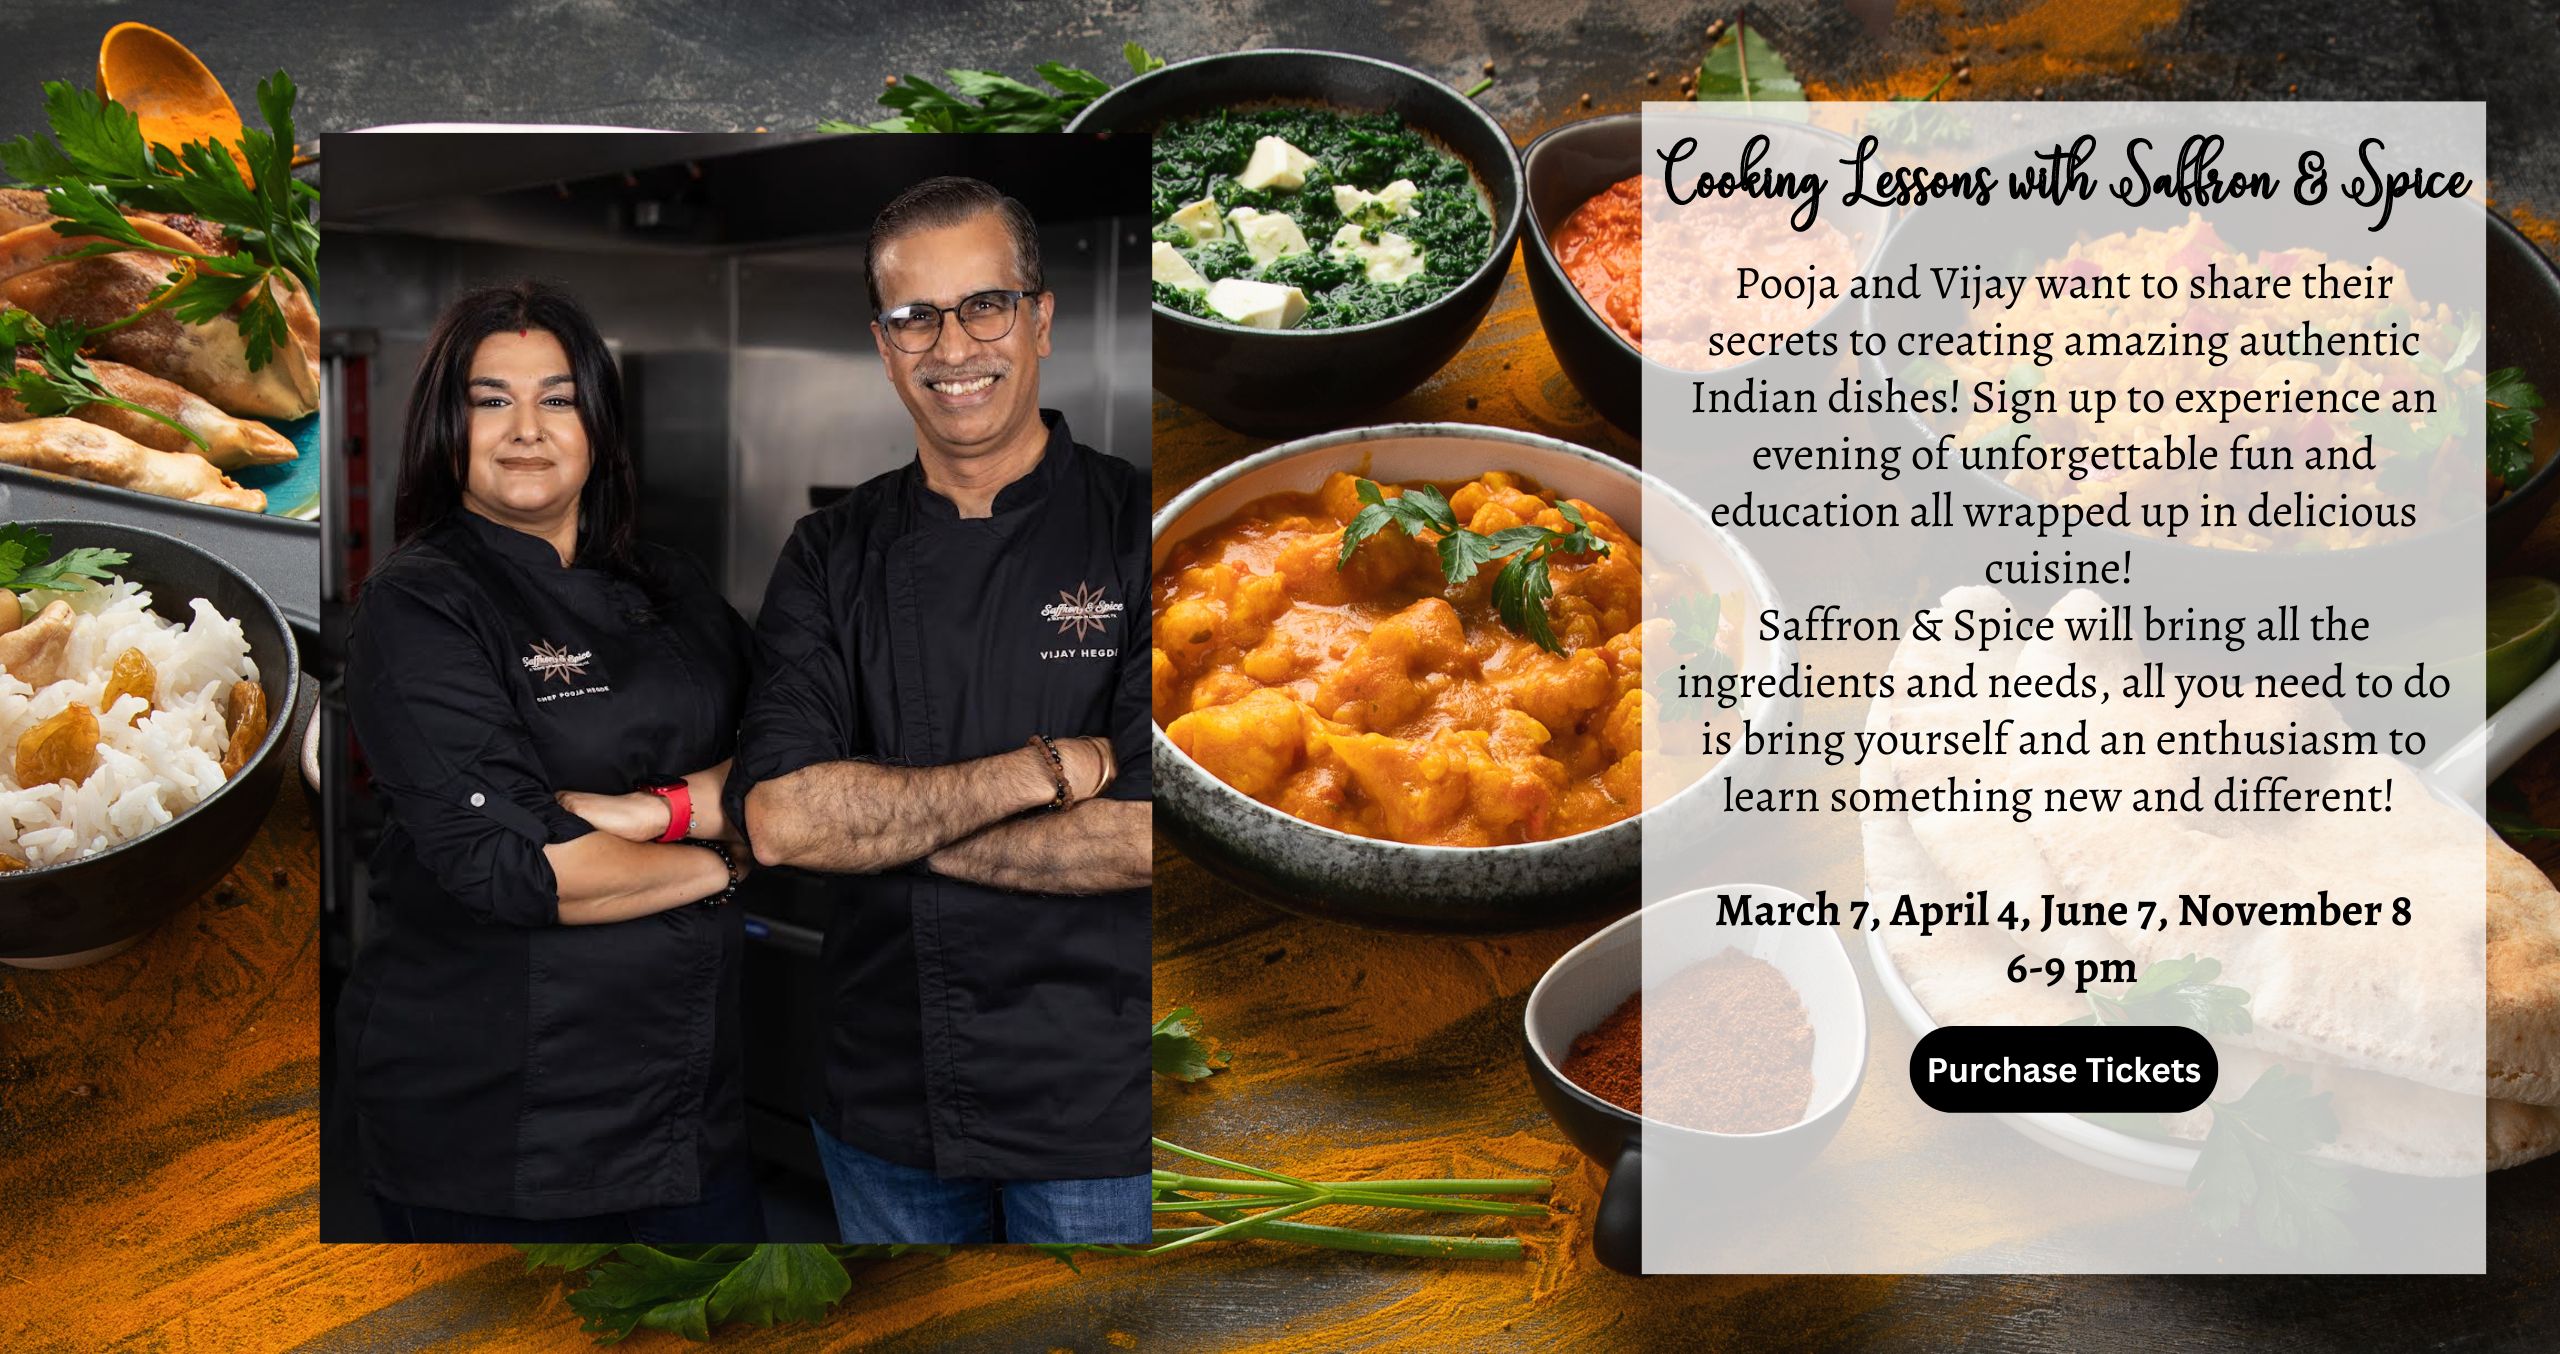 Pooja and Vijay want to share their secrets to creating amazing authentic Indian dishes! Sign up to experience an evening of unforgettable fun and education all wrapped up in delicious cuisine! Saffron & Spice will bring all the ingredients and needs, all you need to do is bring yourself and an enthusiasm to learn something new and different! March 7, April 4, June 7, November 8 6-9 pm